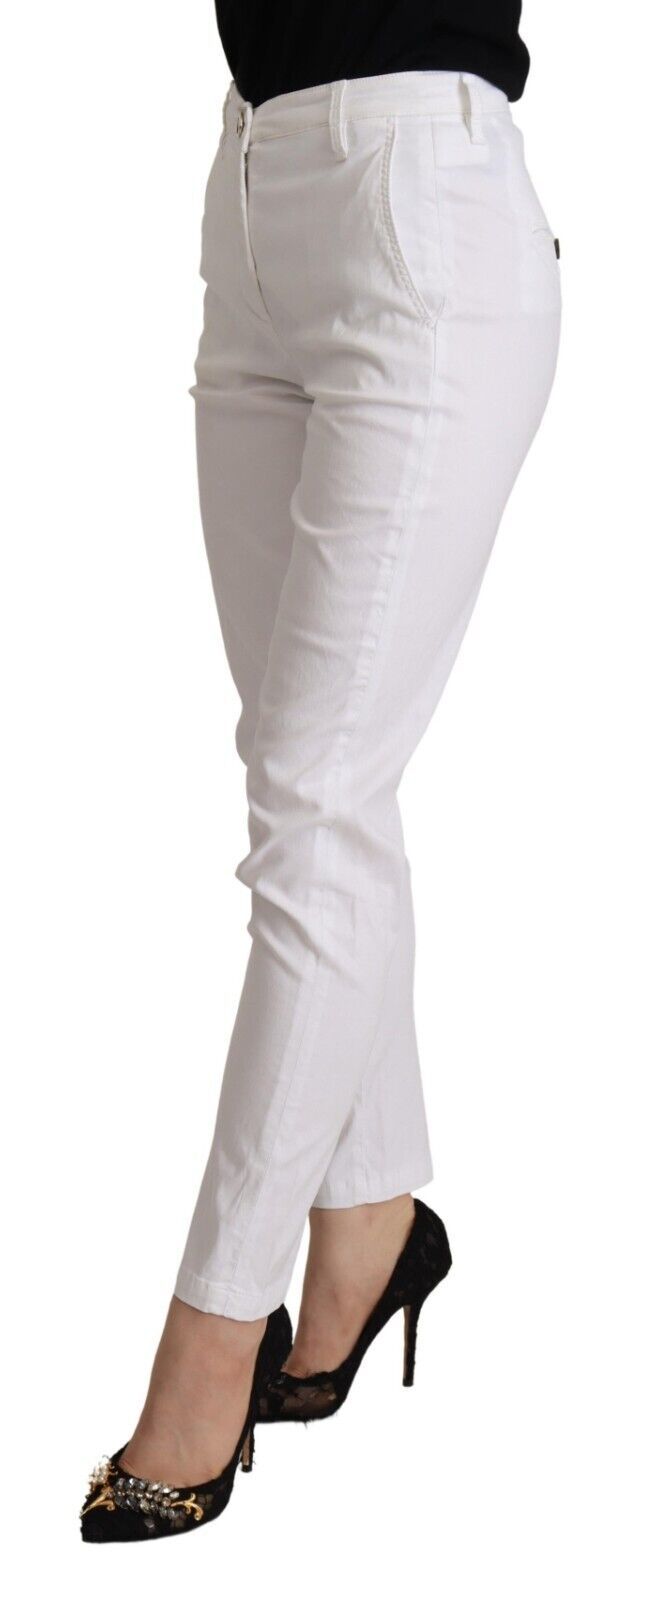 Jacob Cohen Chic White Mid Waist Skinny Cropped Pants